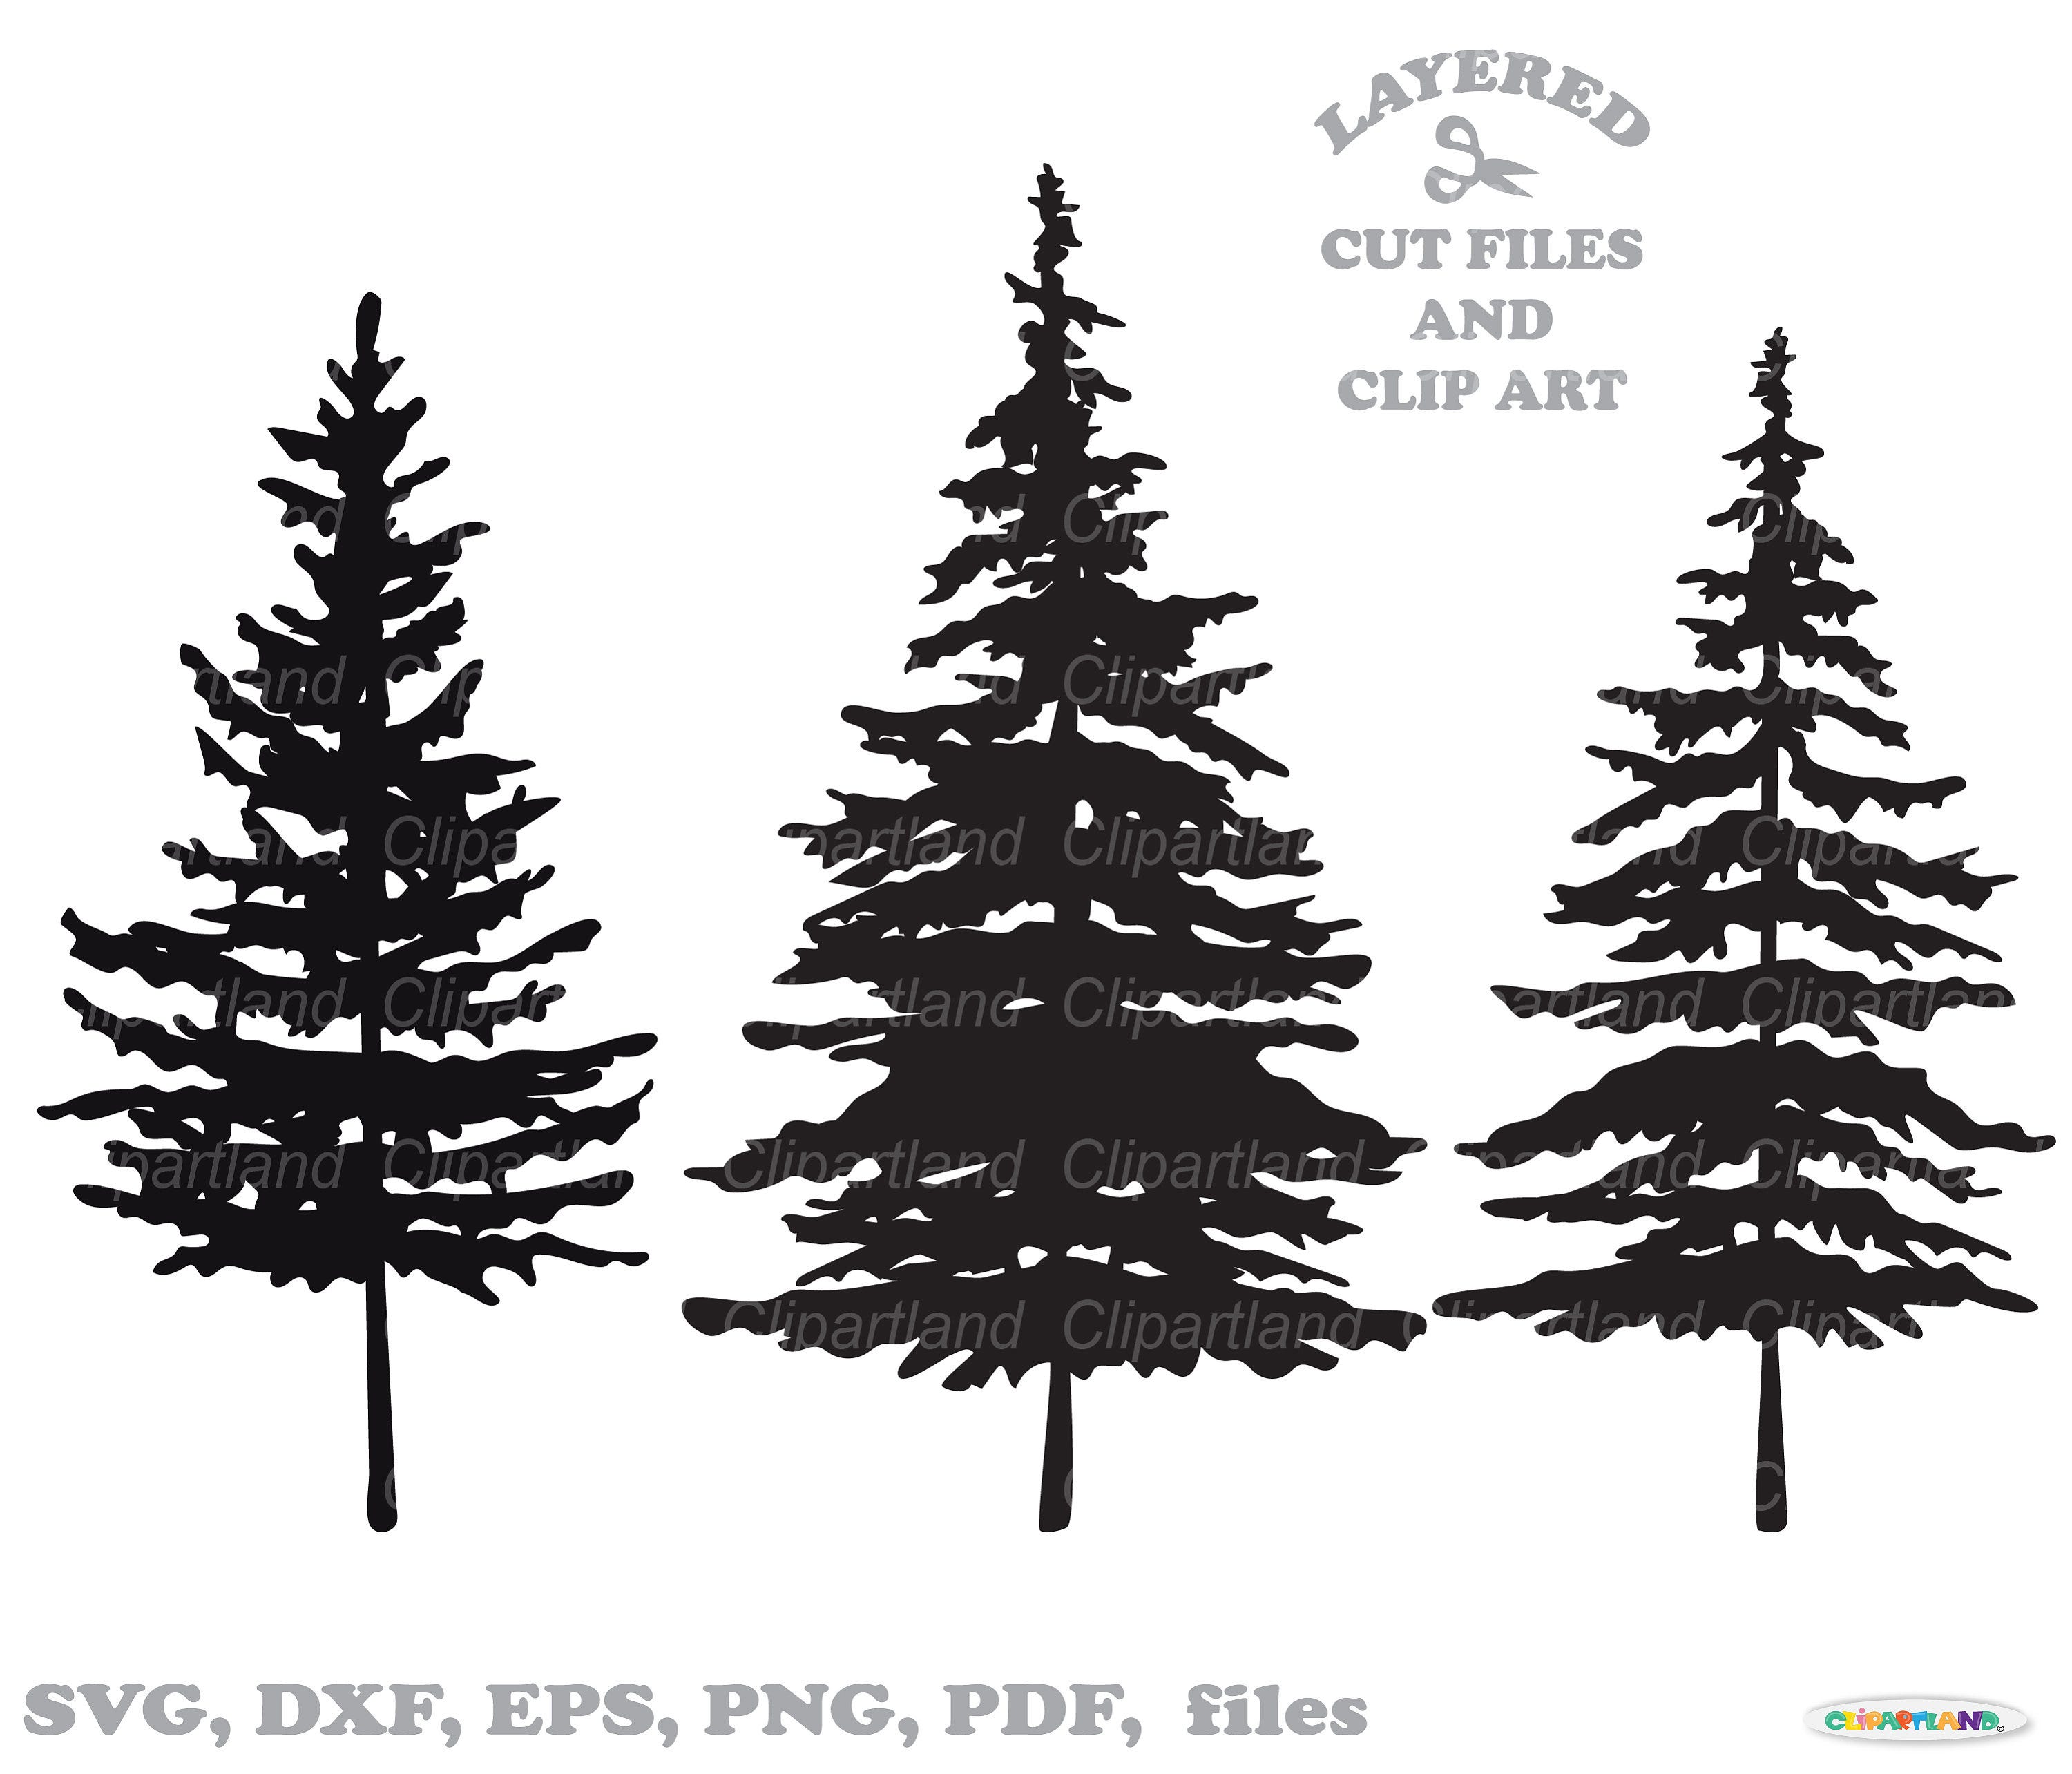 INSTANT Download. Christmas tree silhouette svg, dxf cut files and clip art. Personal and commercial use is included! C_6.